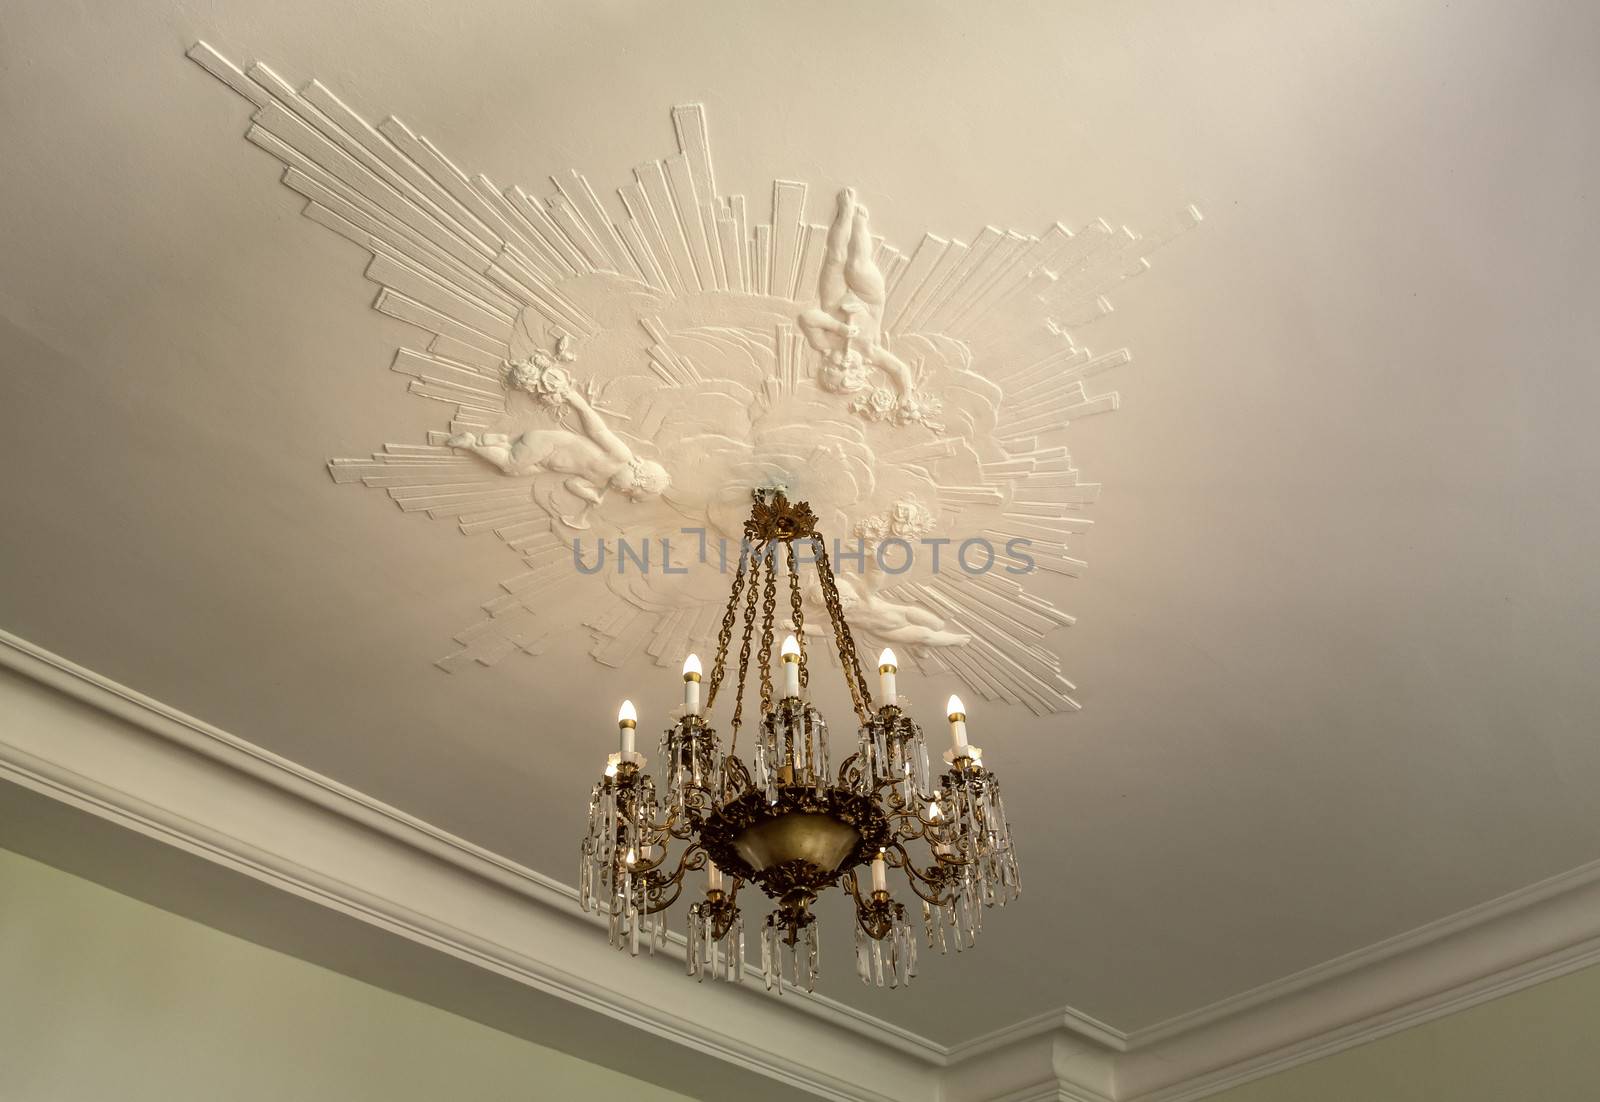 Nice vintage ceiling with old chandelier and beautiful artistic stucco.